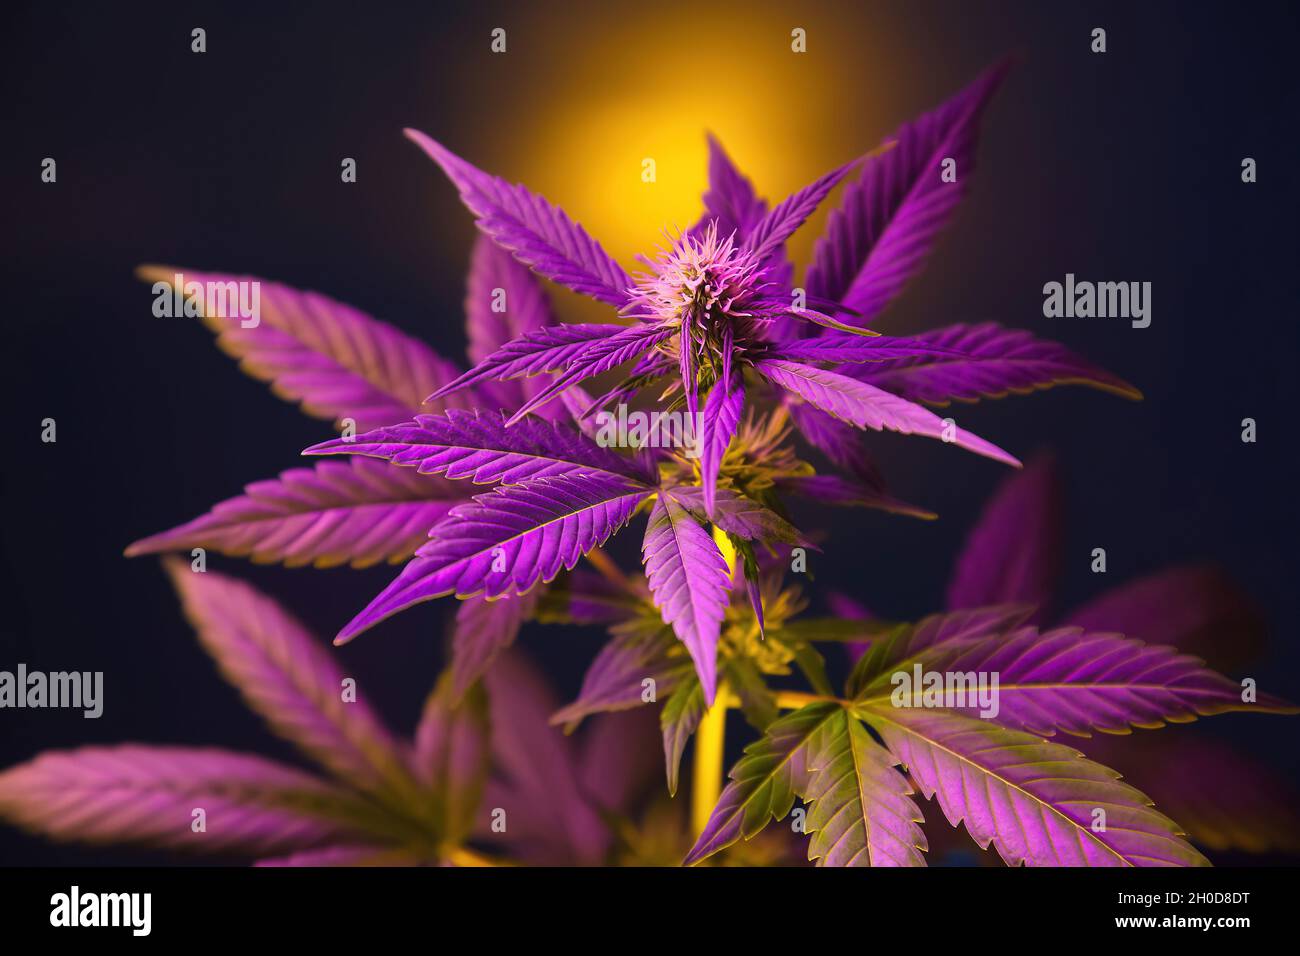 Cannabis plant with purple pink leaves isolated on a black background with sun glare. Flowering marijuana with vibrant foliage and bud flower. New aes Stock Photo